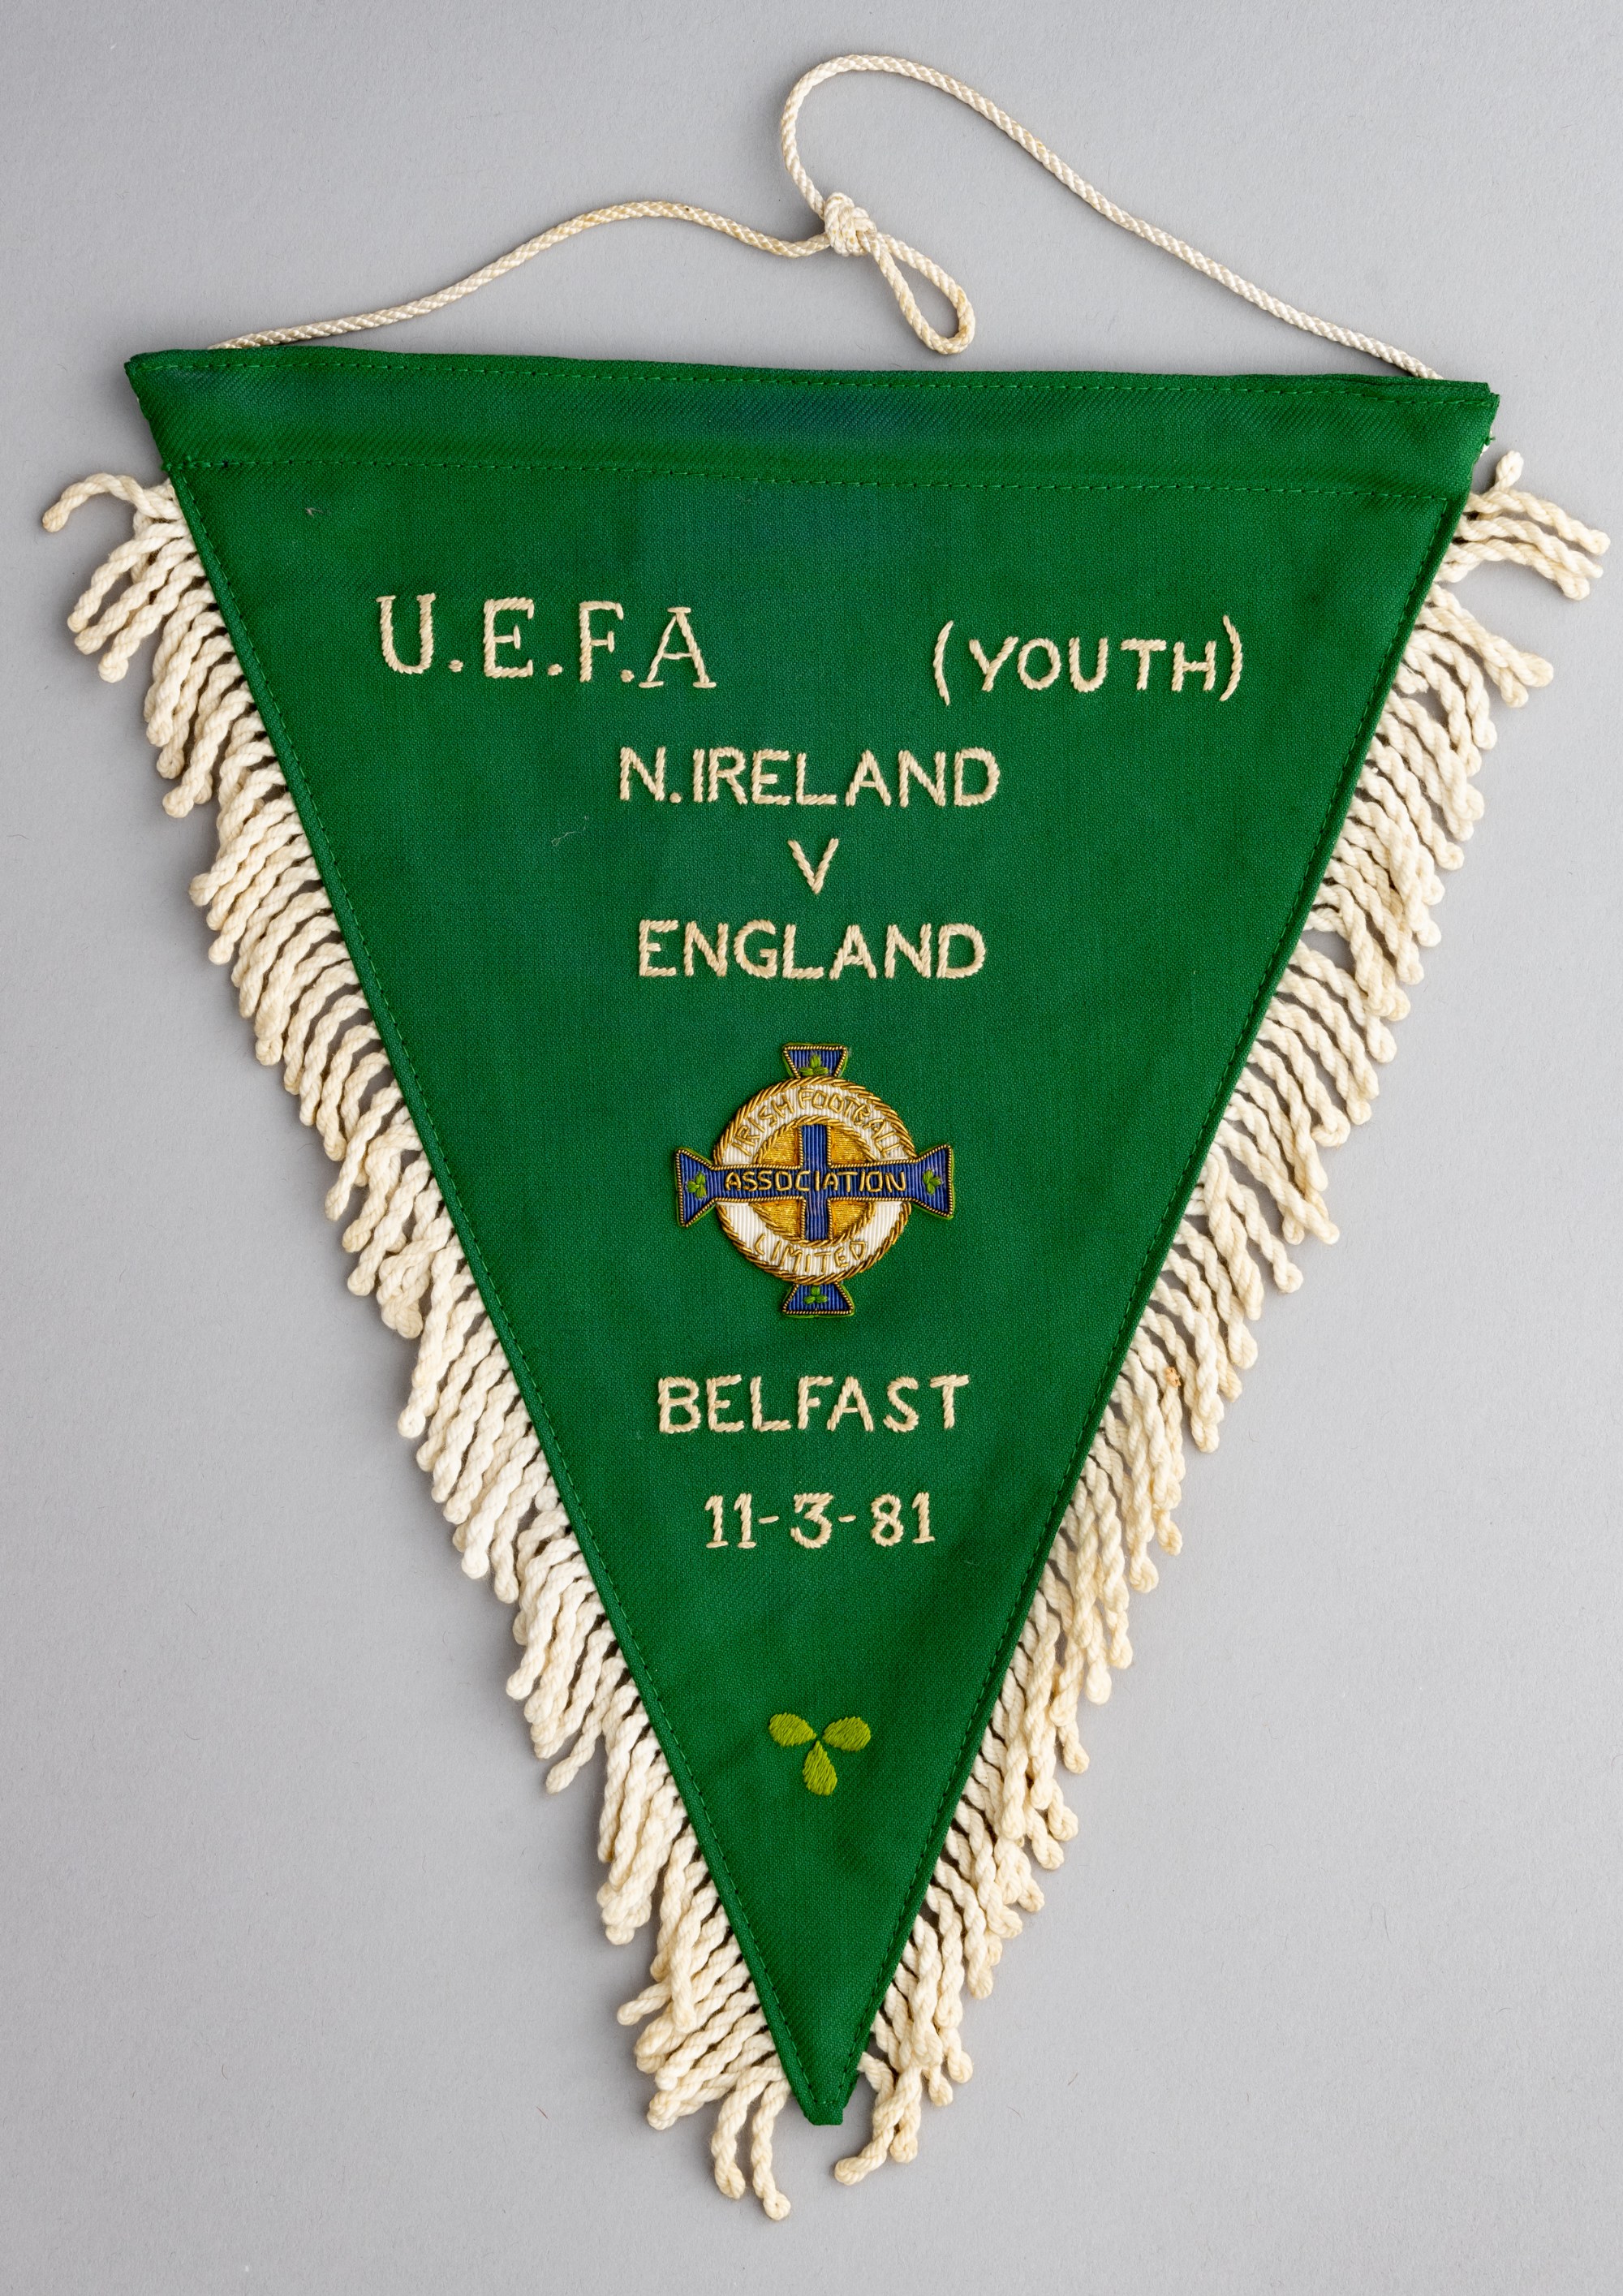 A Northern Ireland pennant issued for the UEFA U-18 championship match v England, played in Belfast,